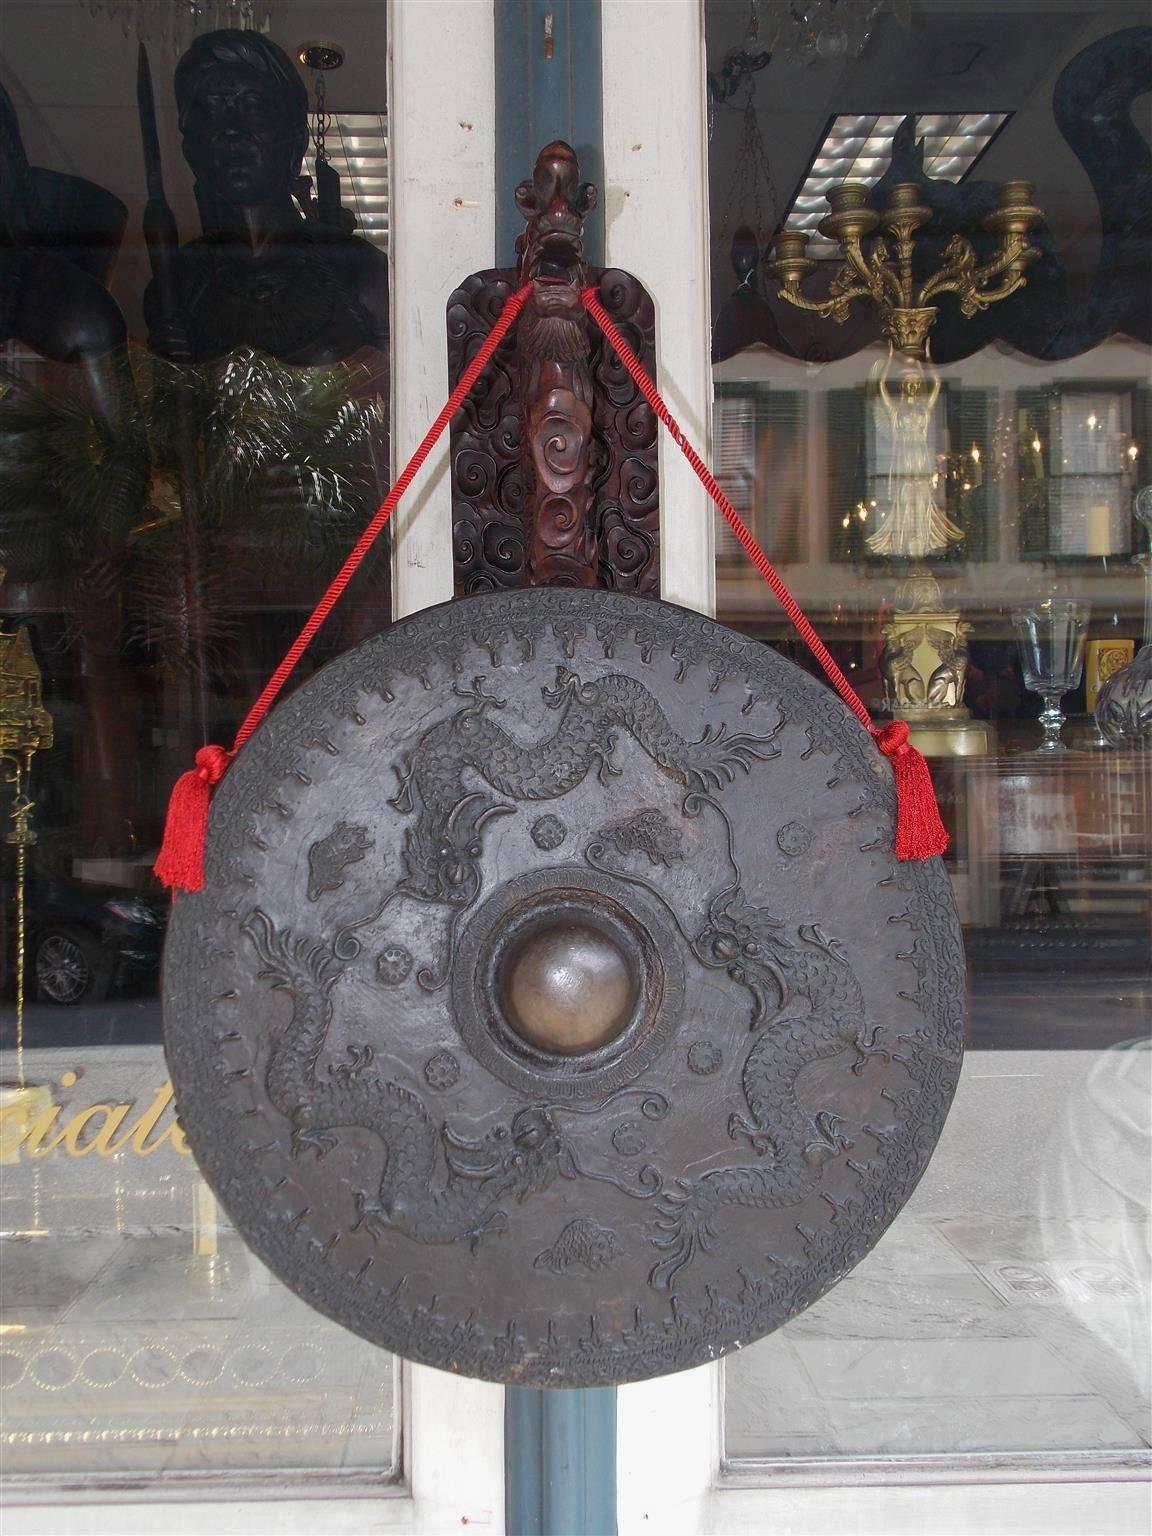 Chinese king wood circular temple gong with a decorative carved wall-mounted dragon bracket supporting a braided silk rope bronze gong with decorative dragons, floral medallions, and Koi fish. Gong has the original mallet. 19th Century. Wall-mounted